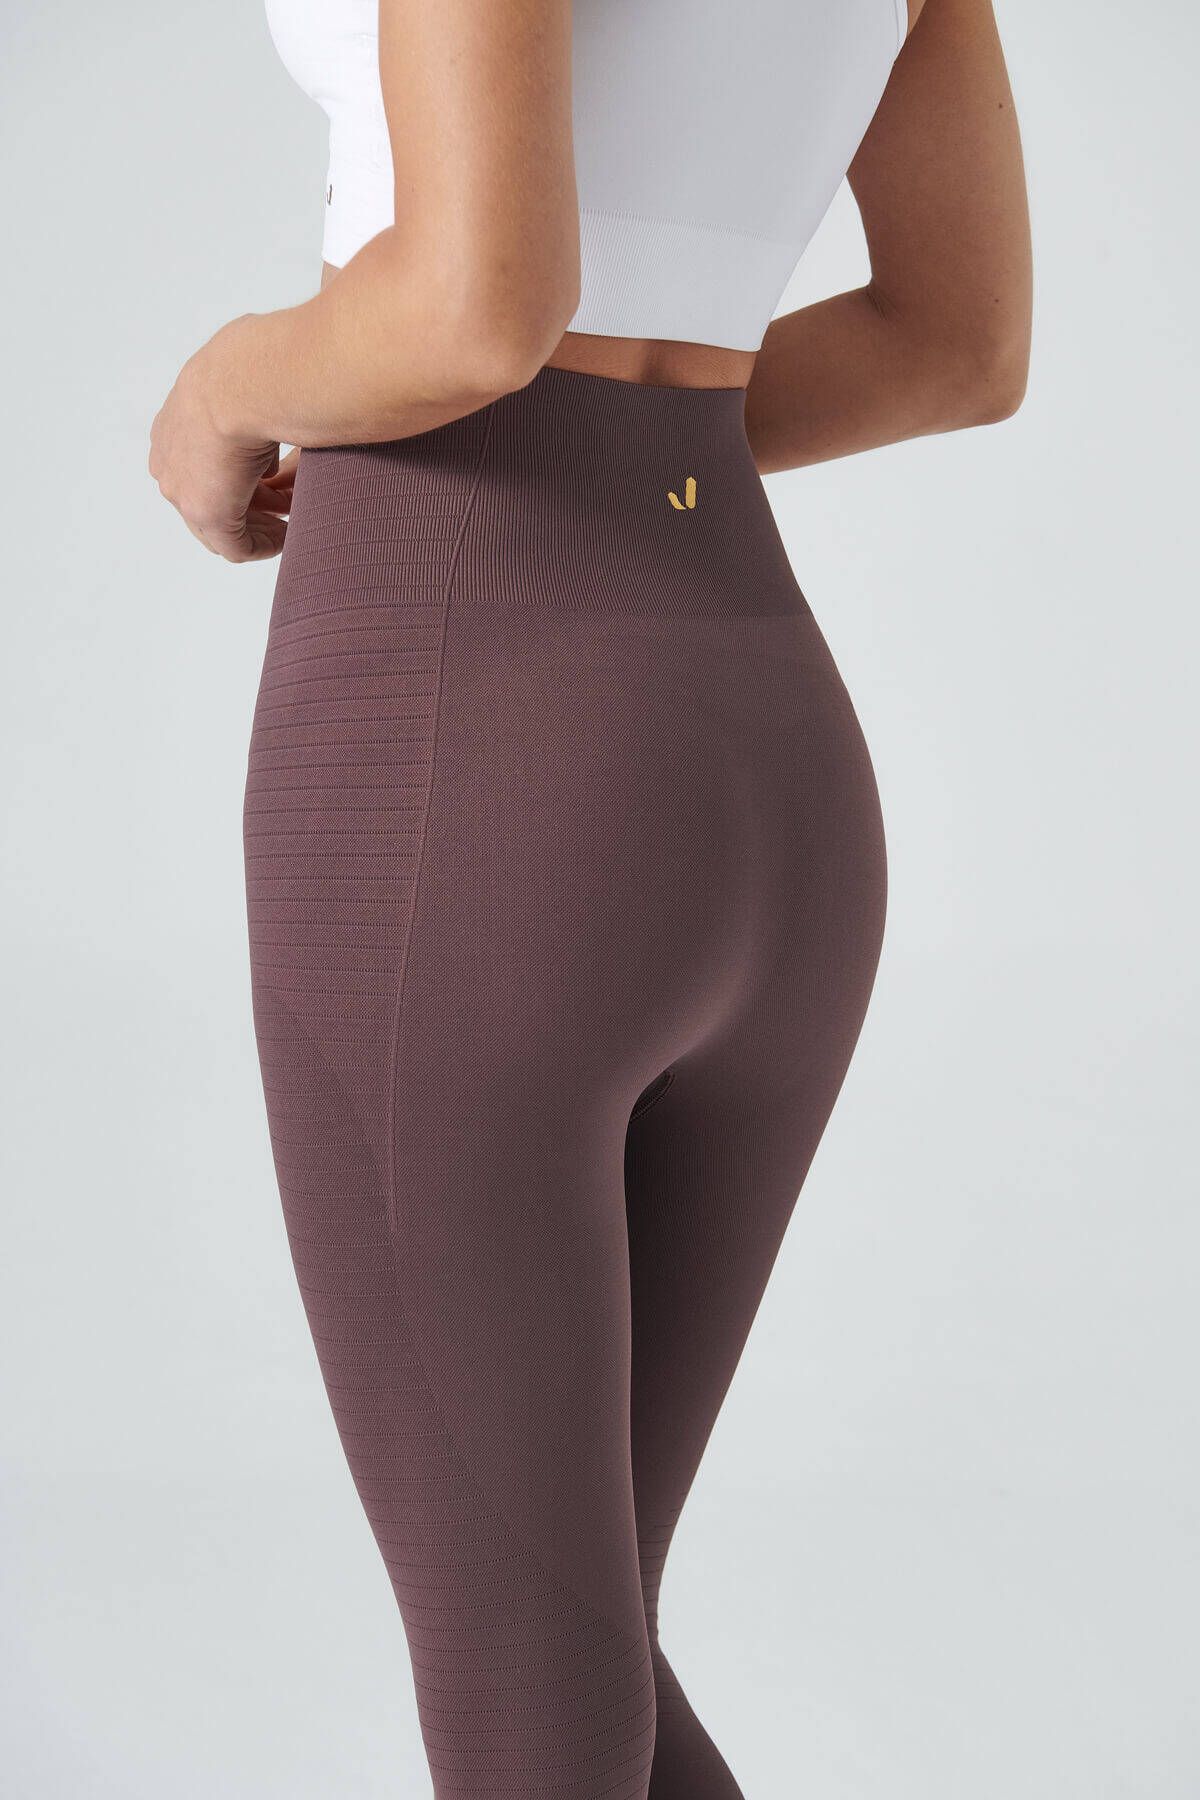 Jerf Gela High Waist, Flexible and Lifting Sports Tights Natural Brown -  Trendyol